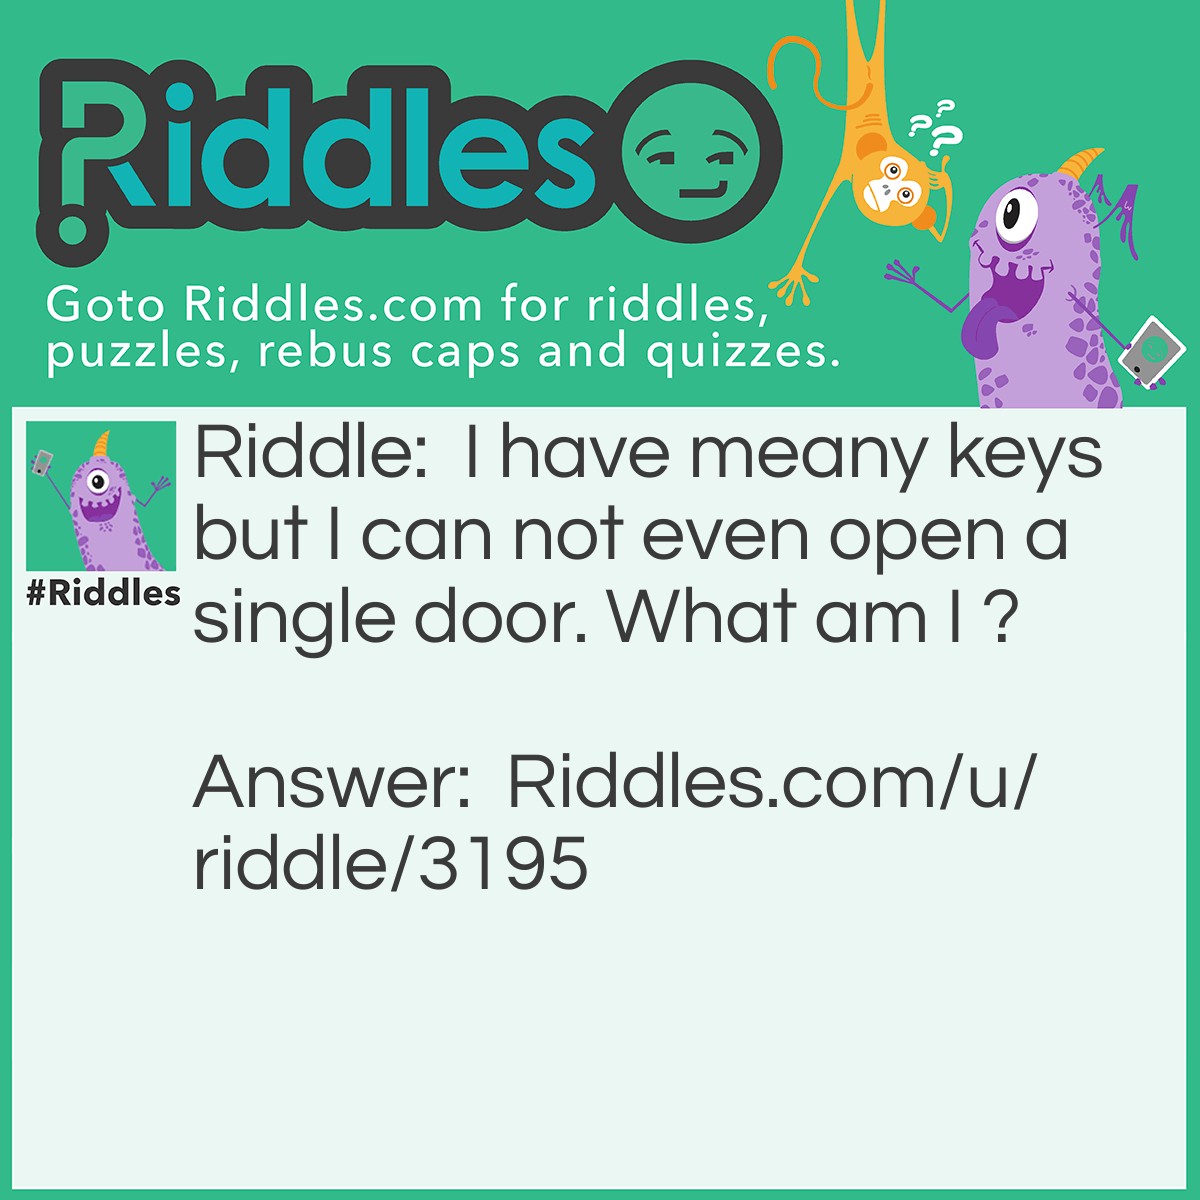 Riddle: I have meany keys but I can not even open a single door. What am I ? Answer: A piano